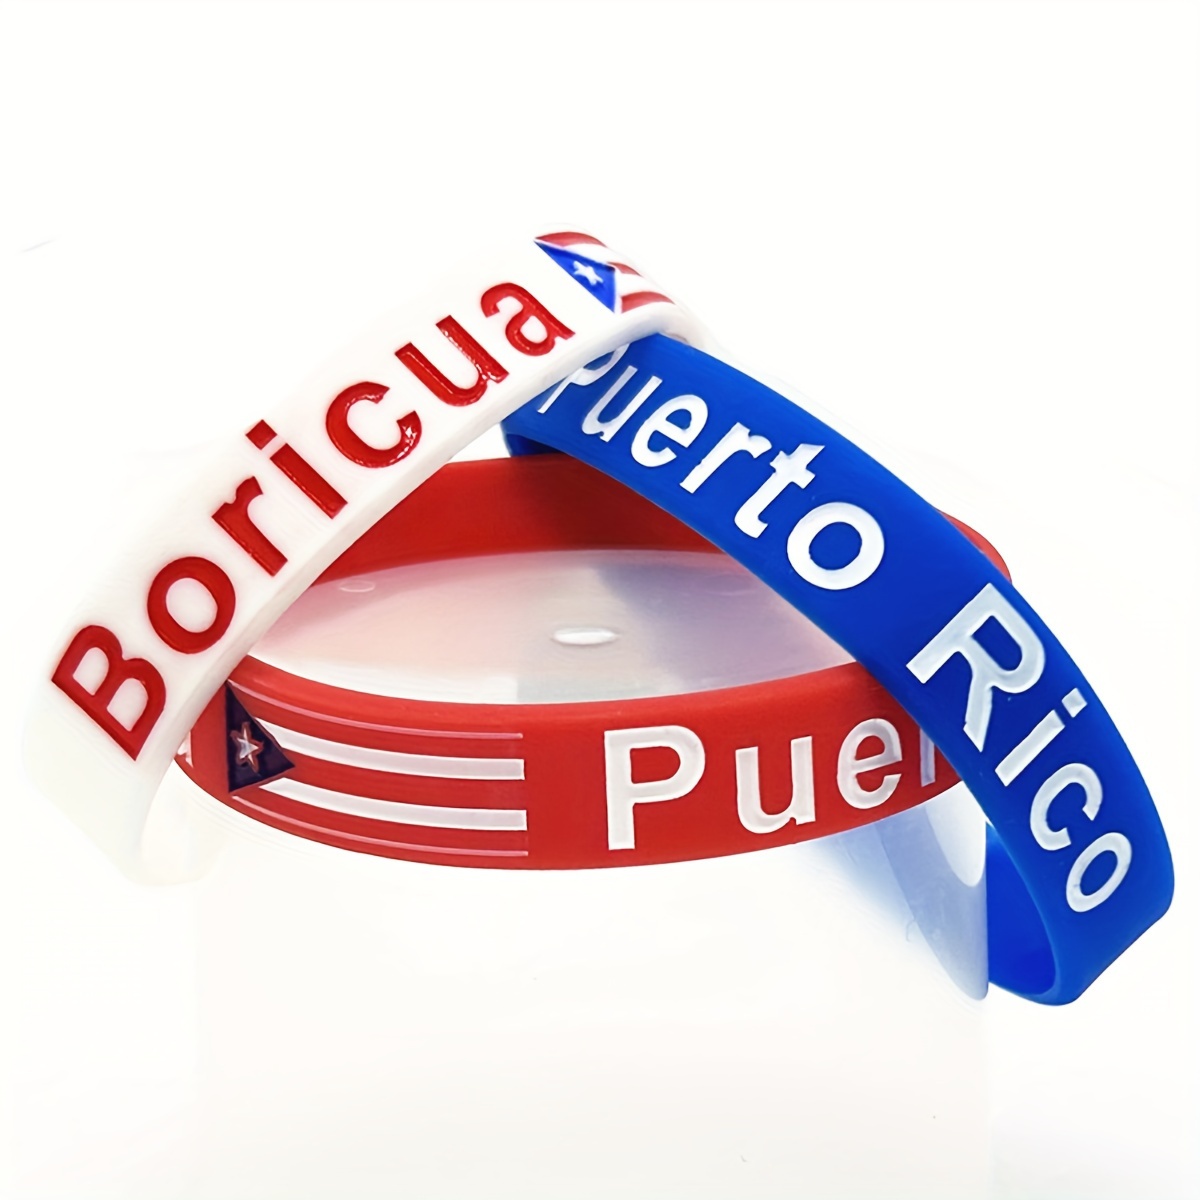 

3-piece Puerto Rico Pride Silicone Wristbands - Waterproof, Stretch-resistant Bracelets For Sports & Everyday Wear